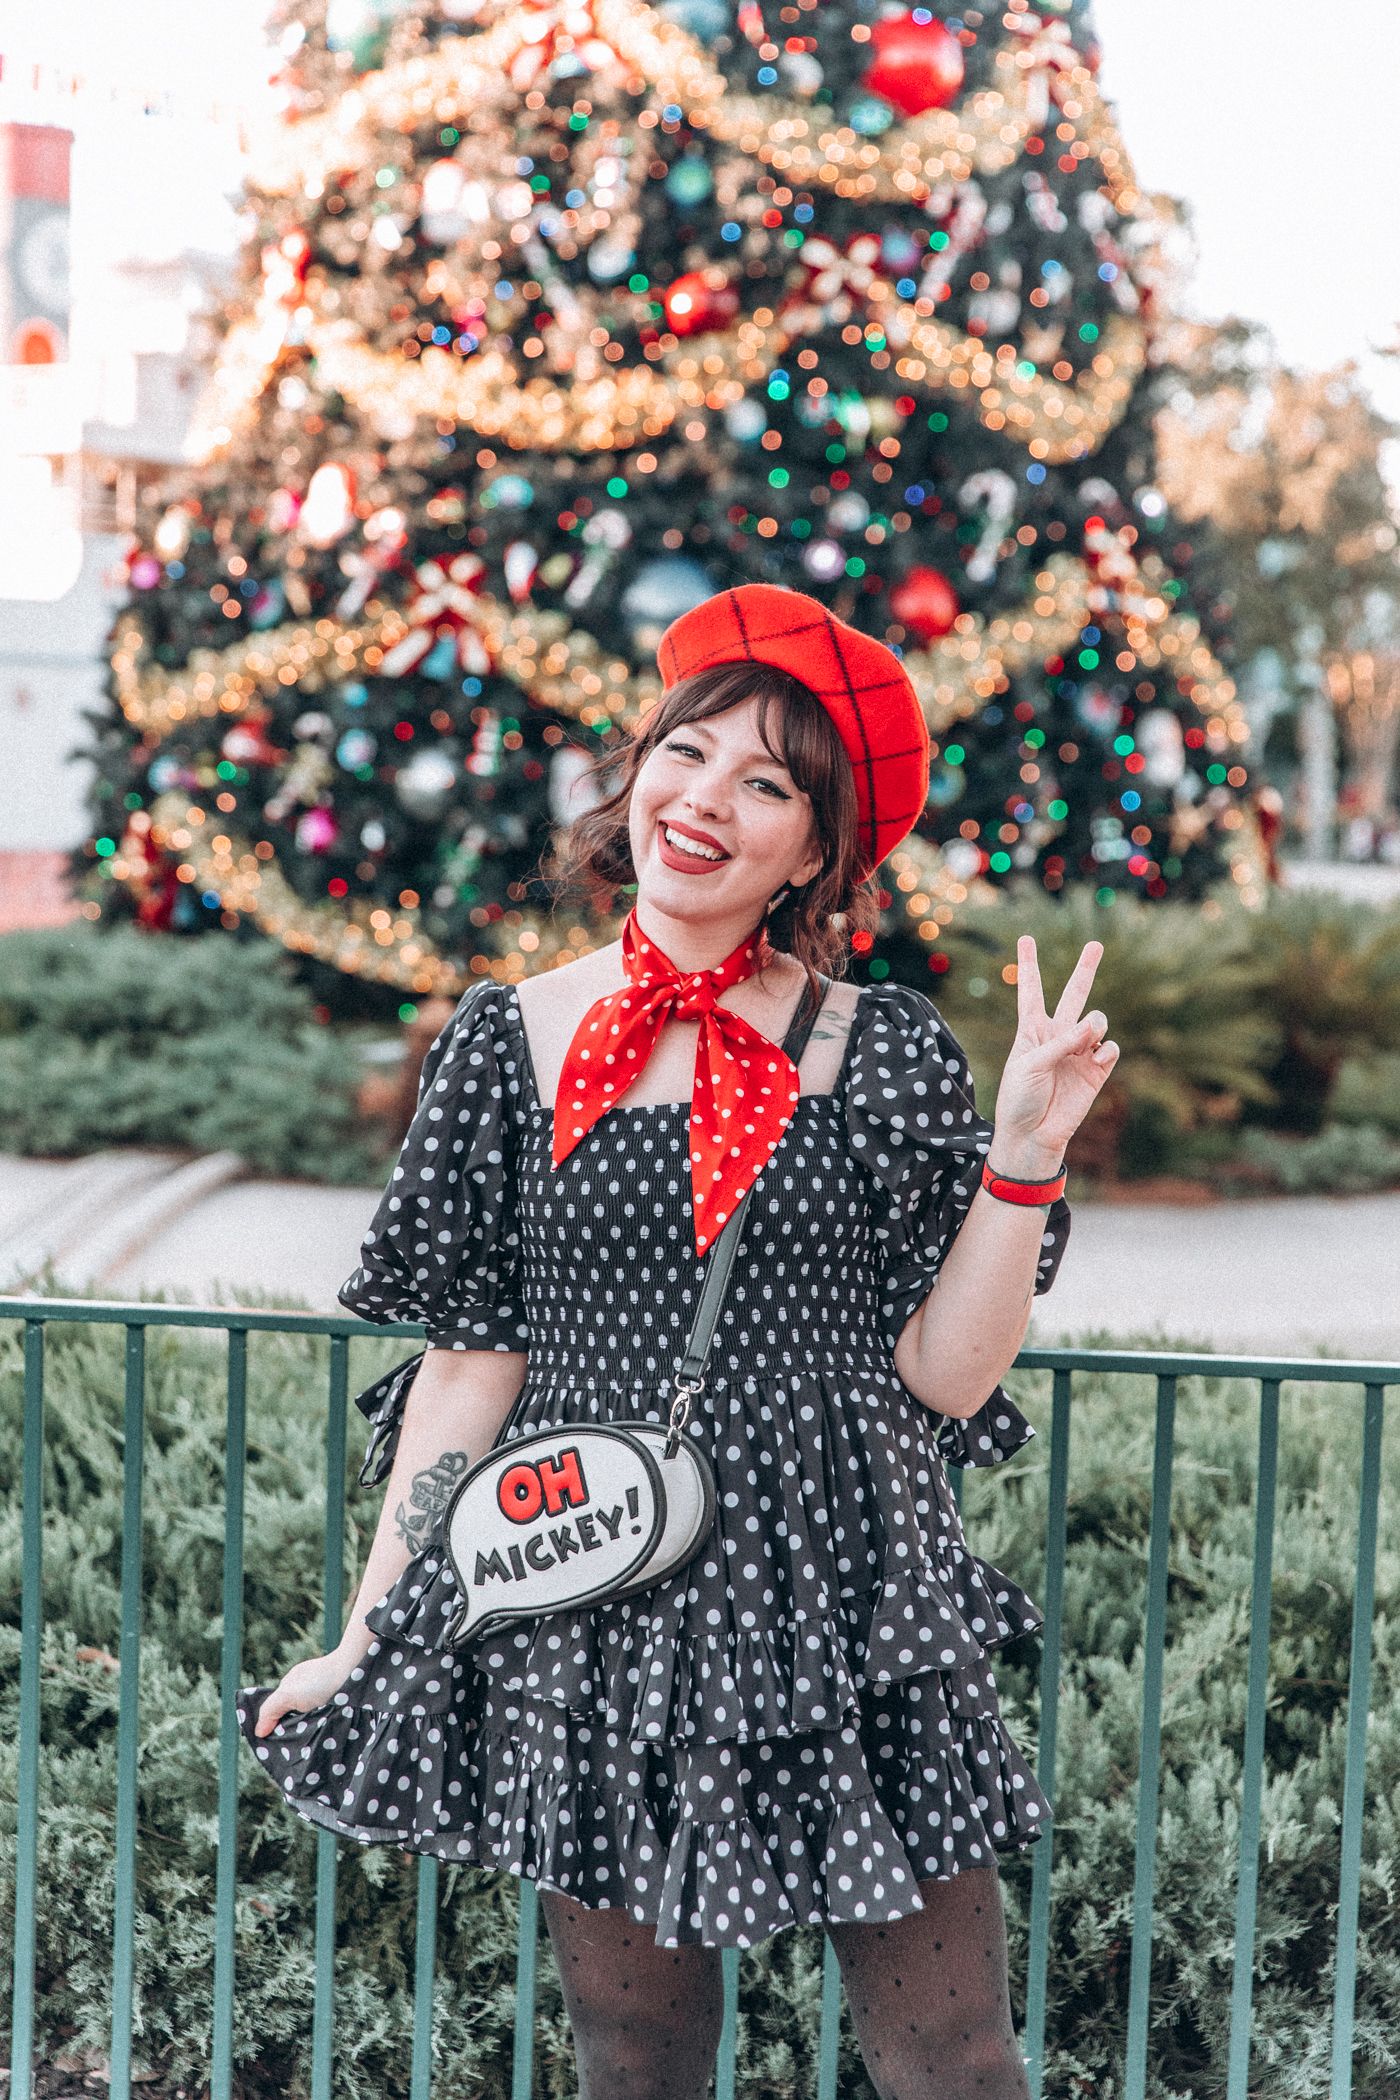 woman in polka dots dress with Oh Mickey bag